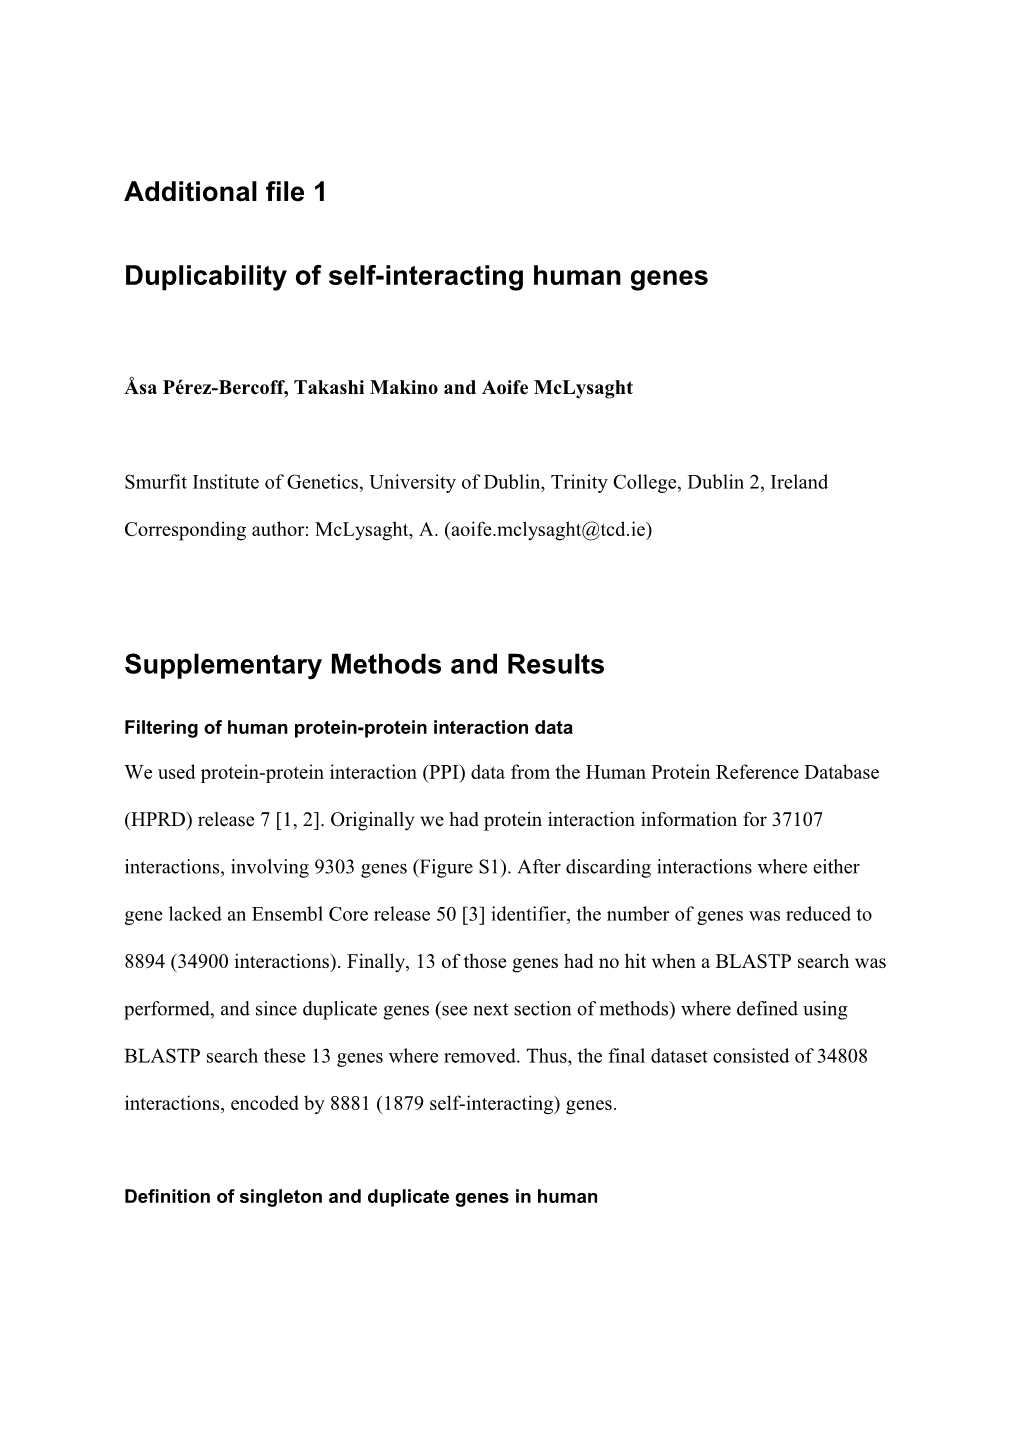 Duplicability of Self-Interacting Human Genes